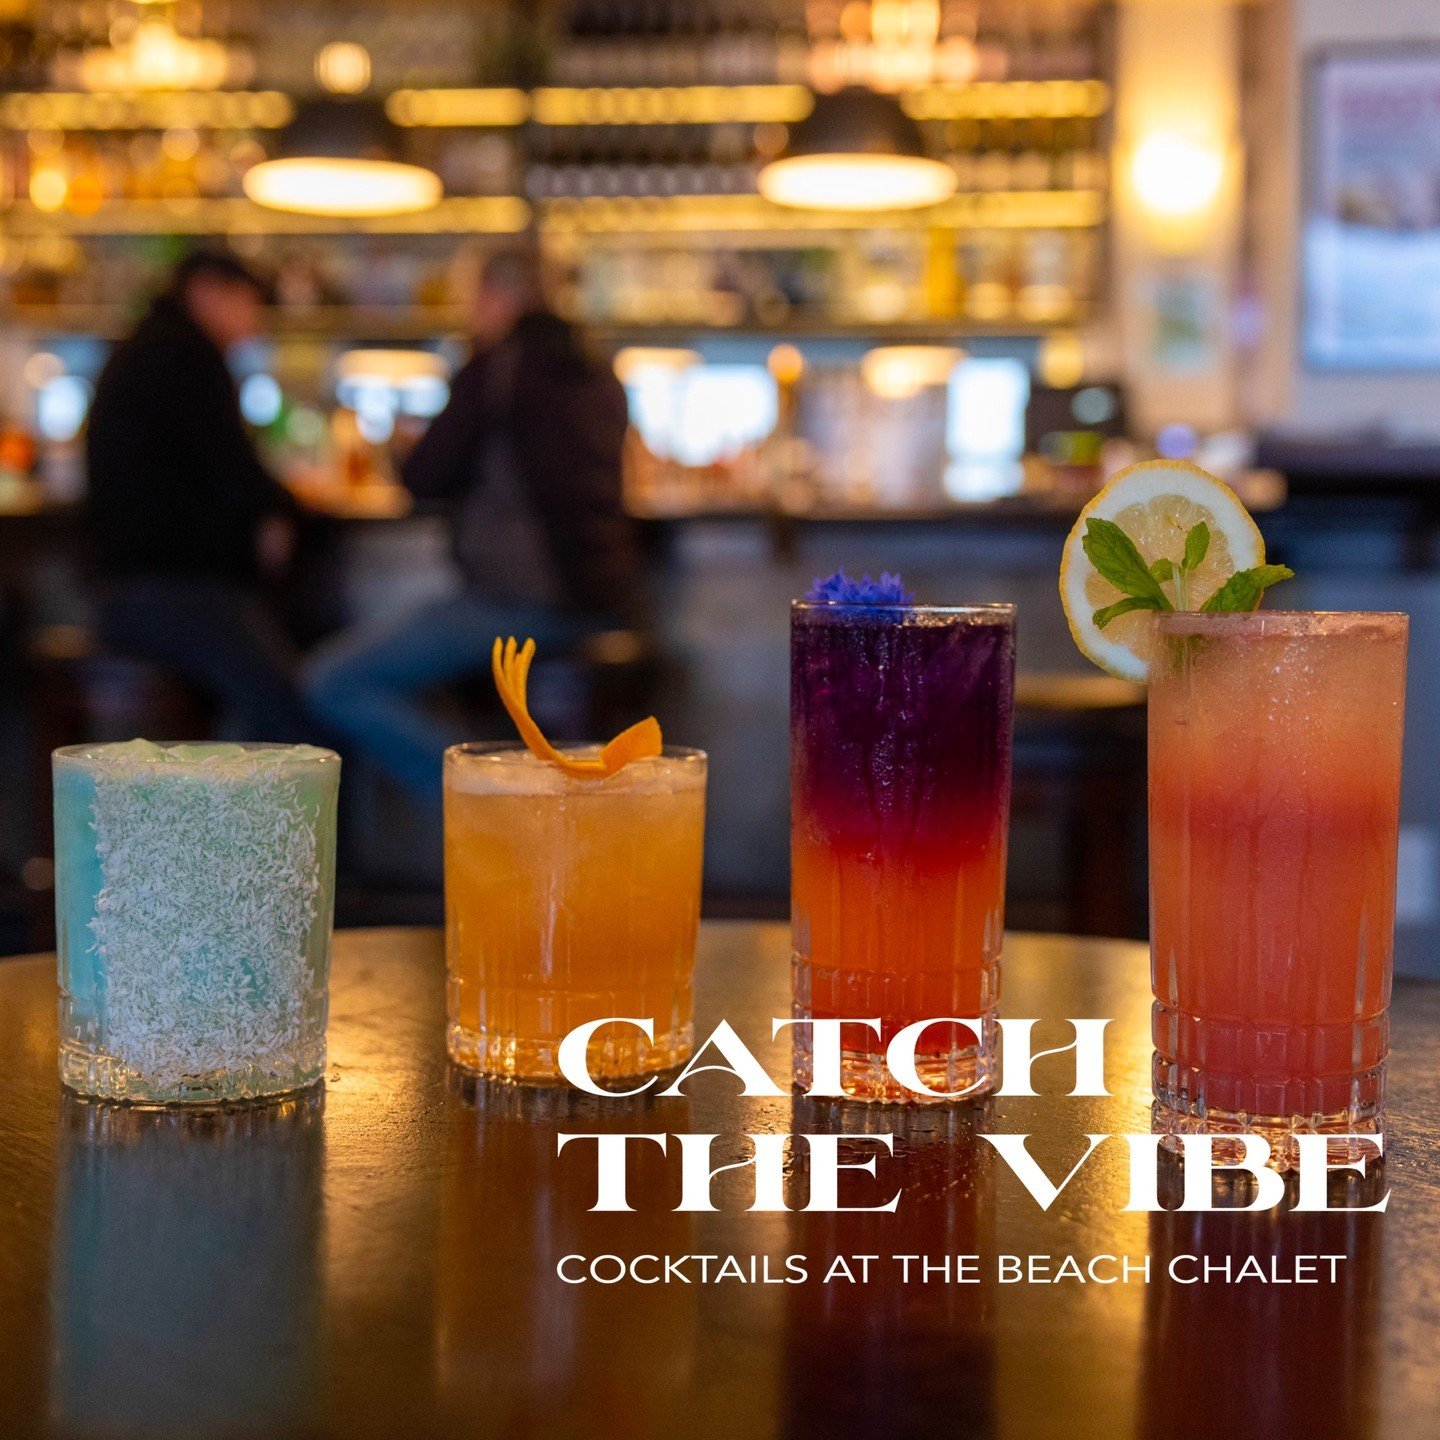 🌊🍹 Dive into the ultimate beach vibe with our brand new cocktail creations at the Beach Chalet! 🏖✨ From refreshing classics to innovative twists, there's a sip to suit every mood and moment by the shore. Grab your sunnies, sink your toes in the sa